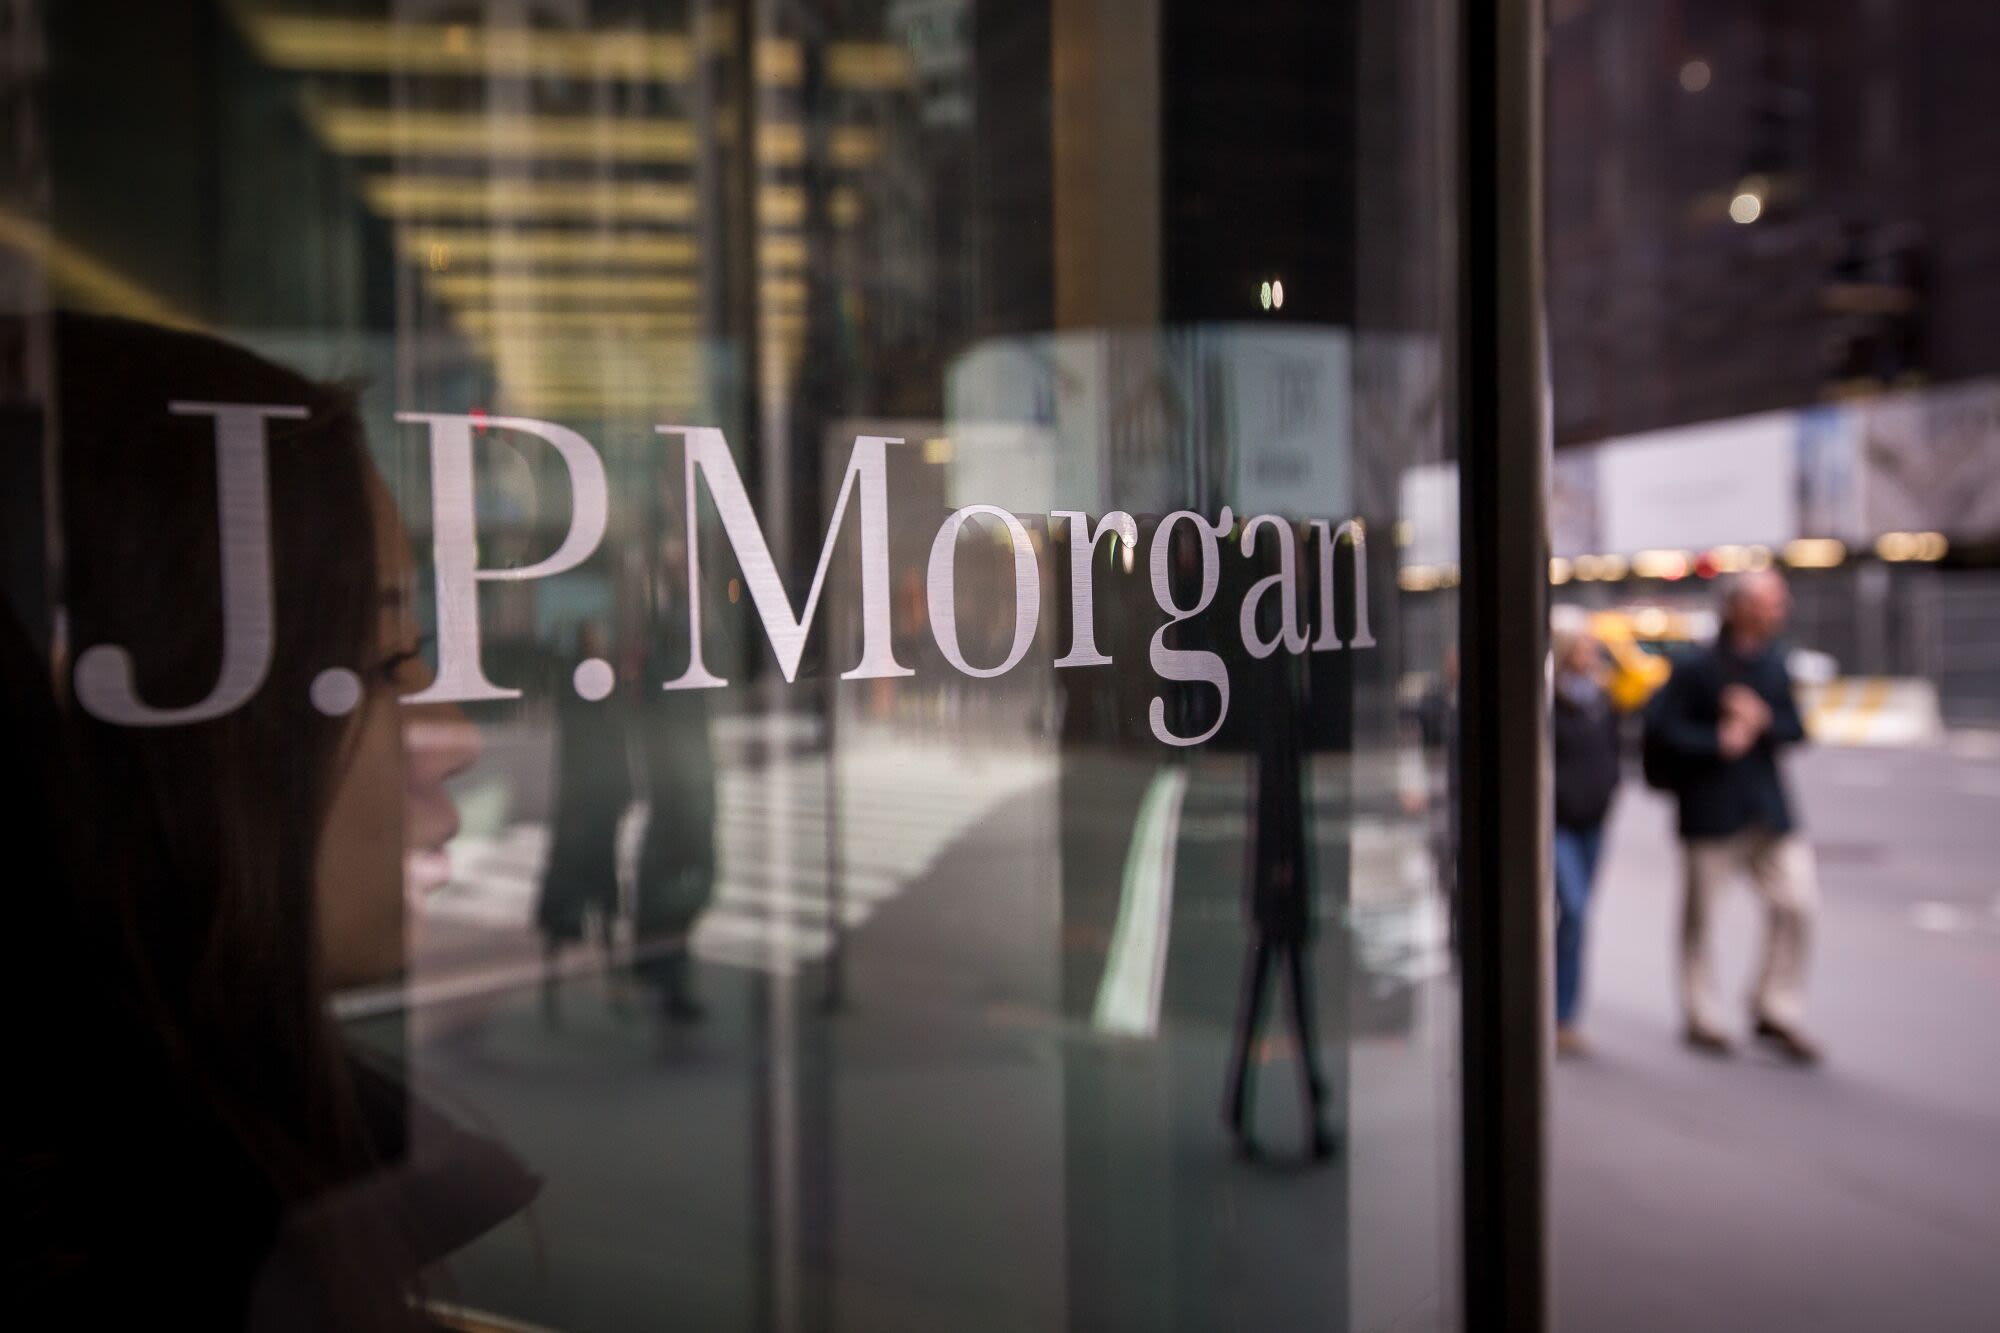 JPMorgan Failed to Monitor Billions of Client Orders, CFTC Says